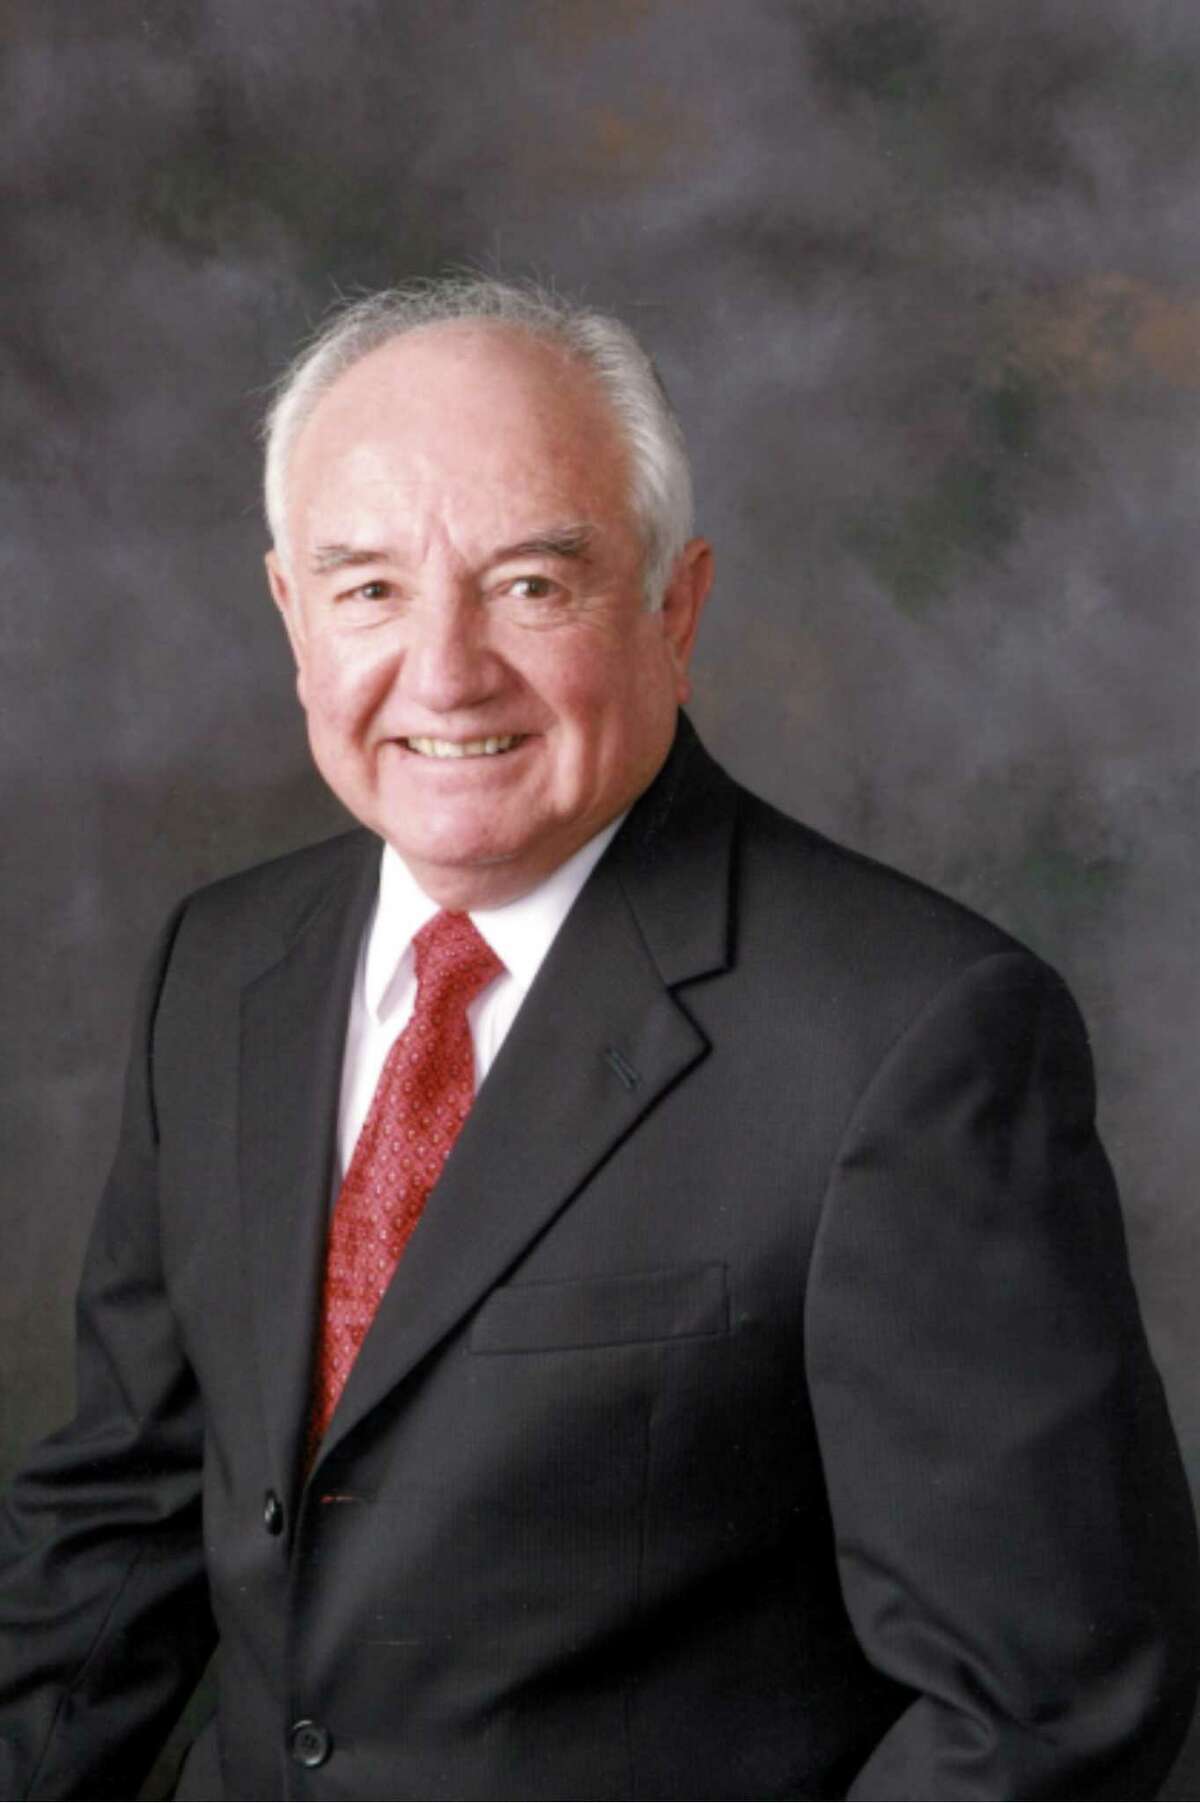 Carlos Mejia, local engineer and philanthropist, passed away at the age of 78 years old on June 26.